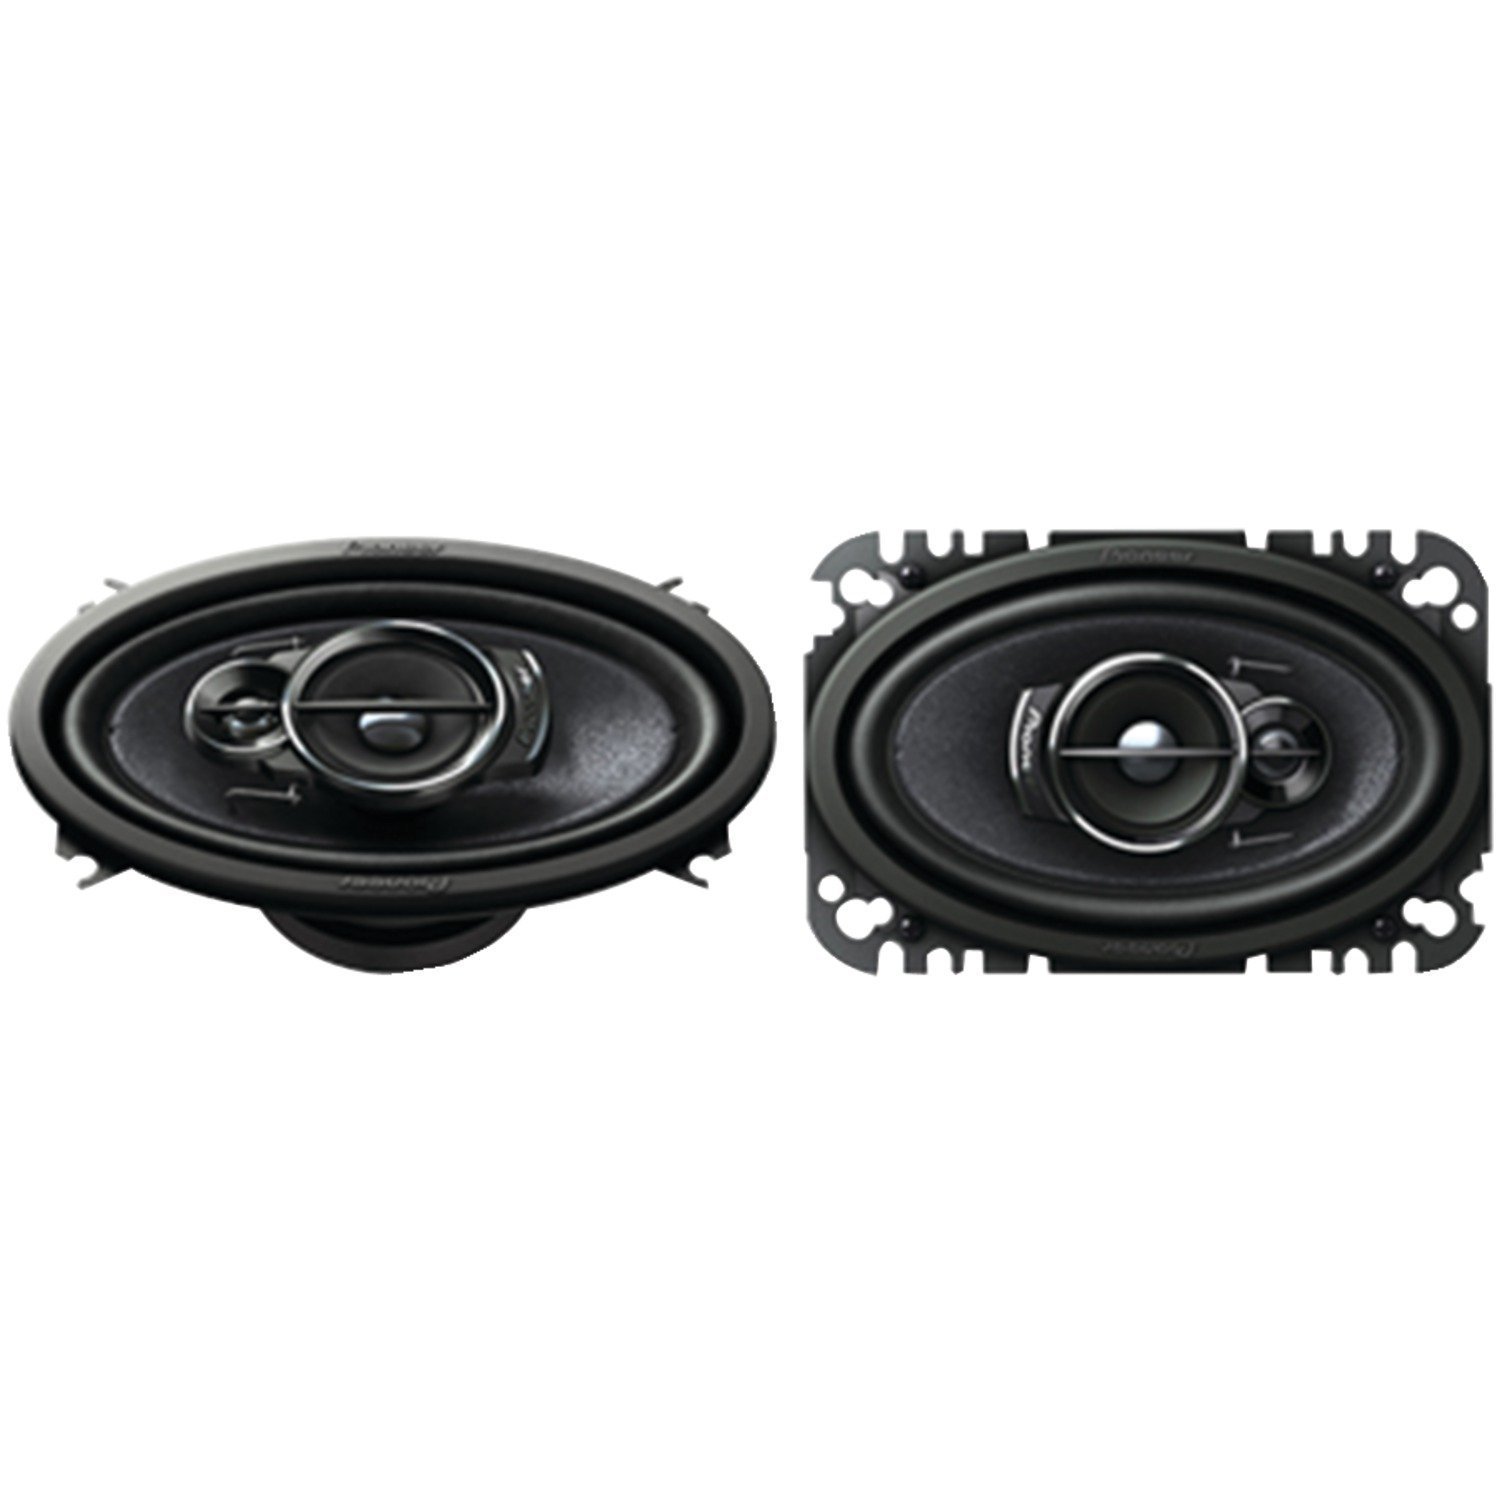 Pioneer 200W 4x6 Inch 3 Way 4 Ohms Coaxial Car Audio Speakers Pair | TS-A4676R - image 1 of 5